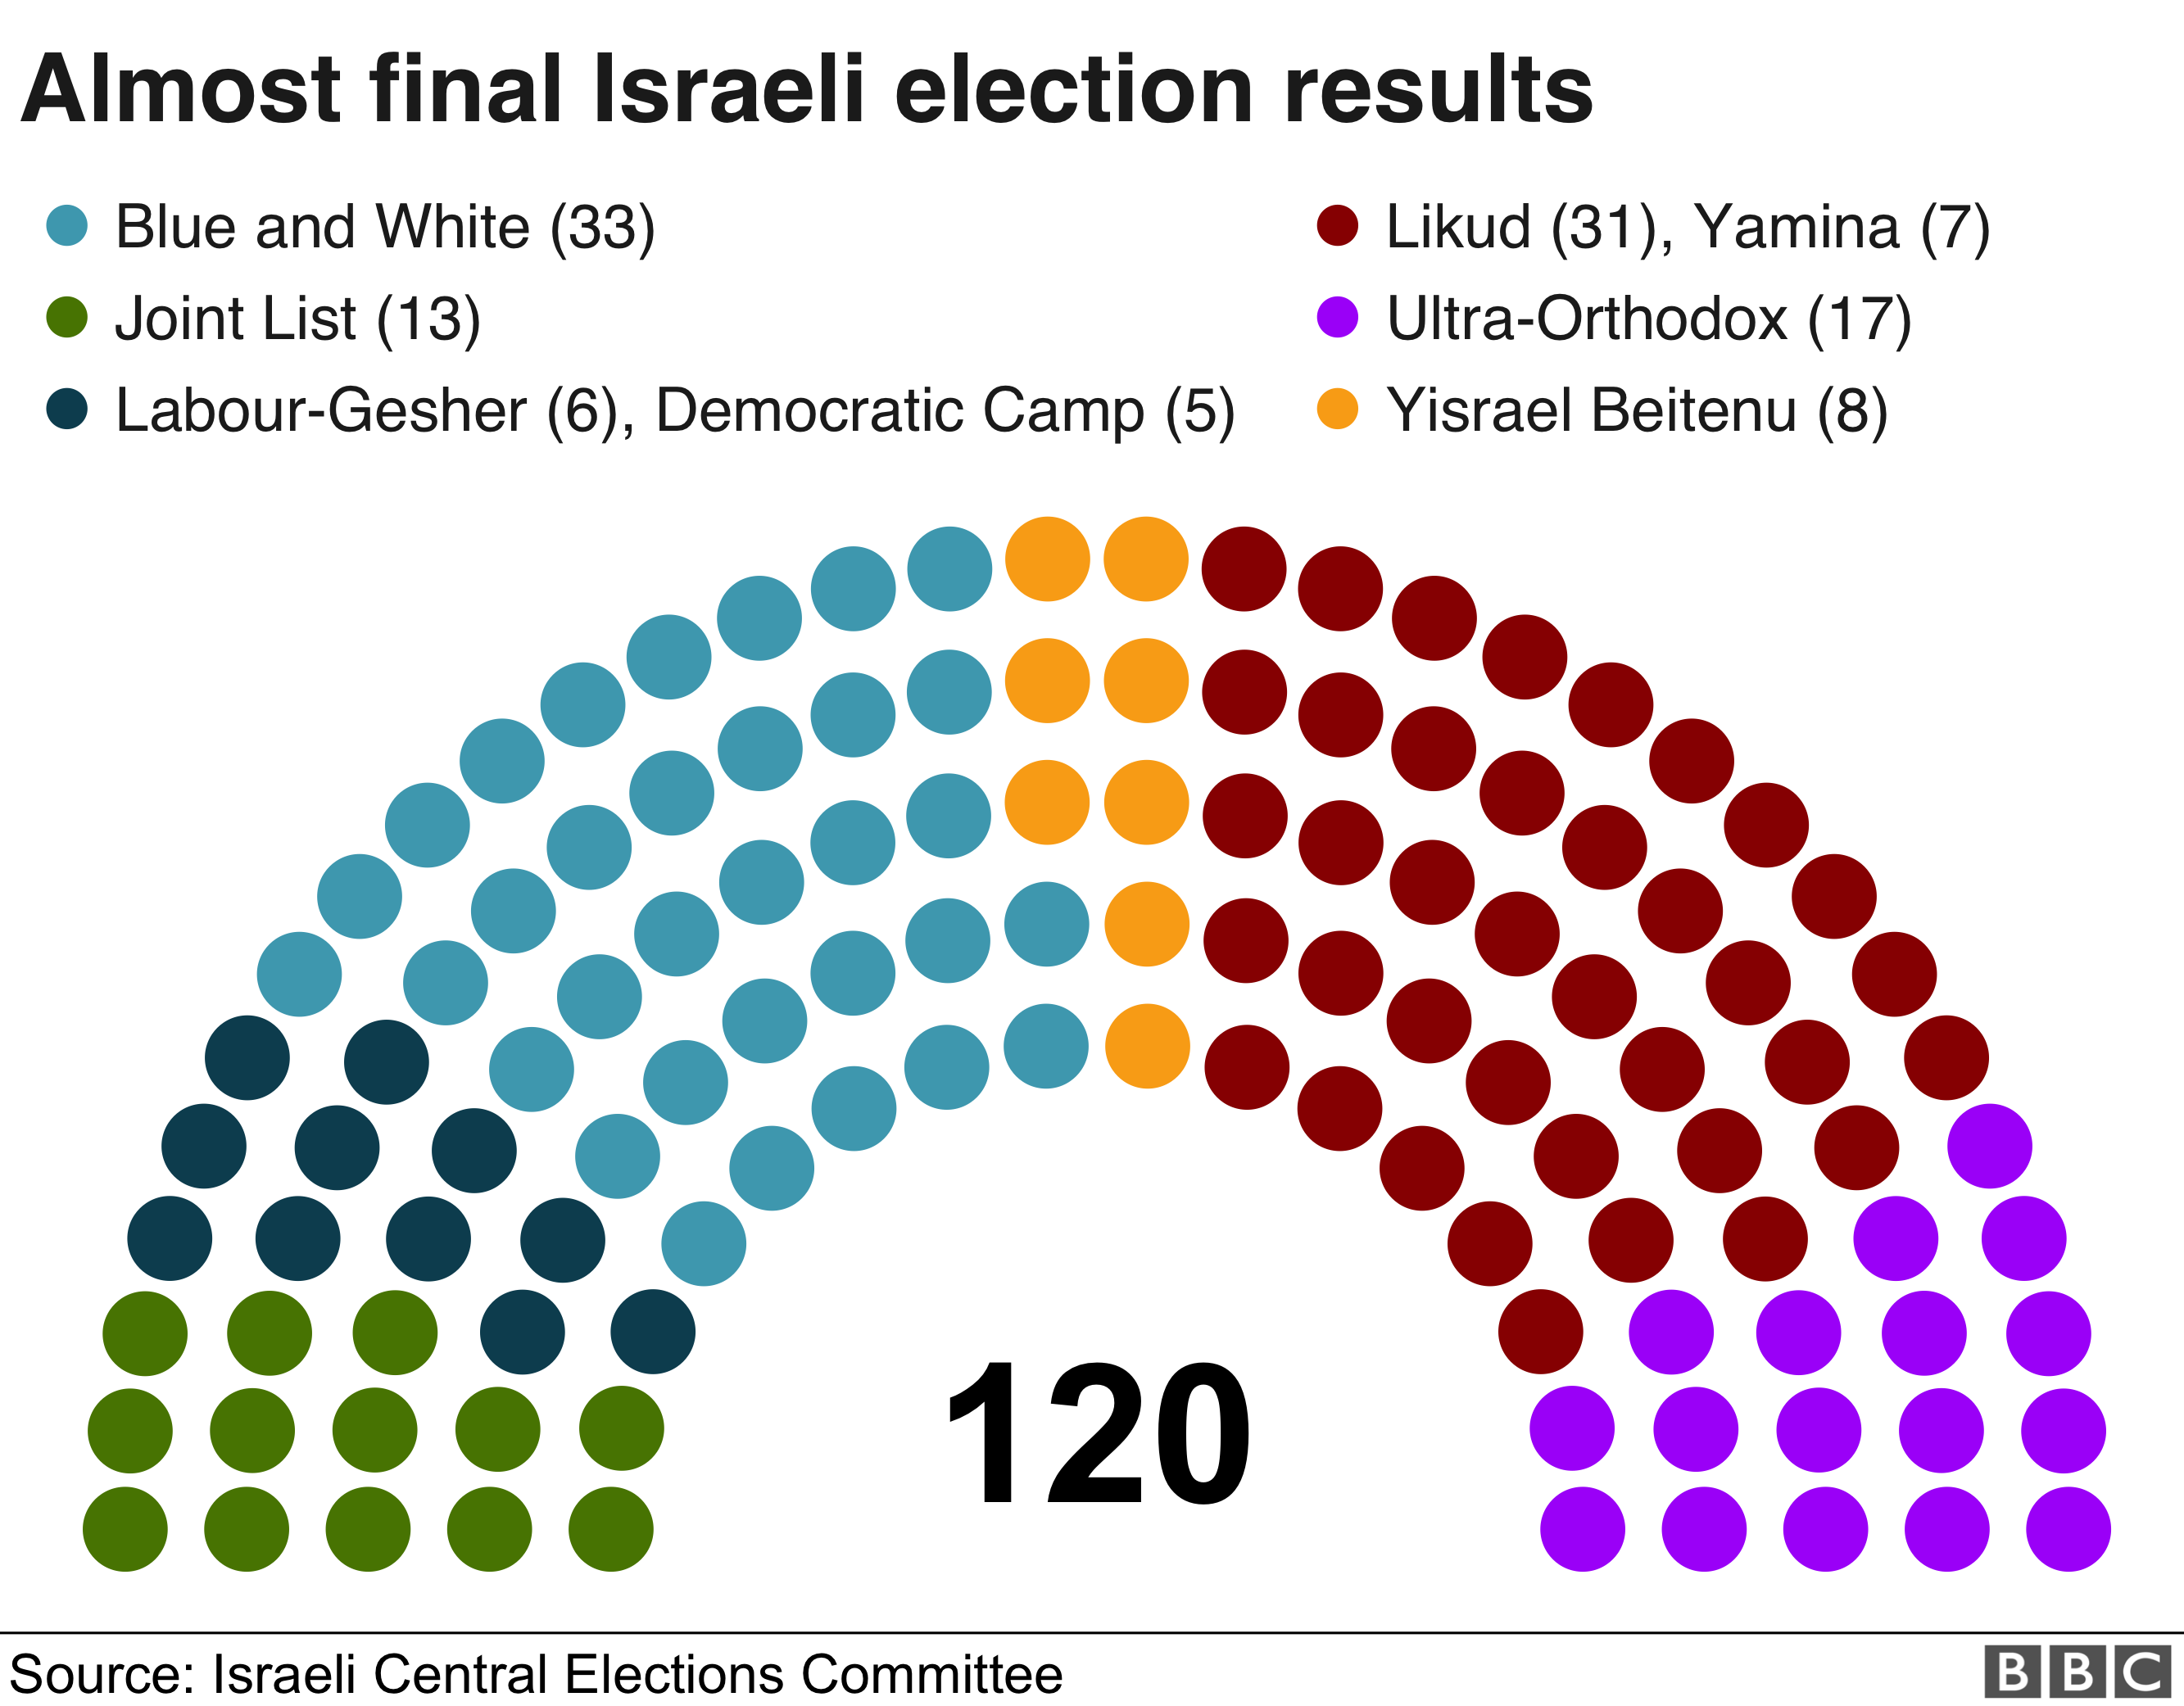 Almost final Israeli election results